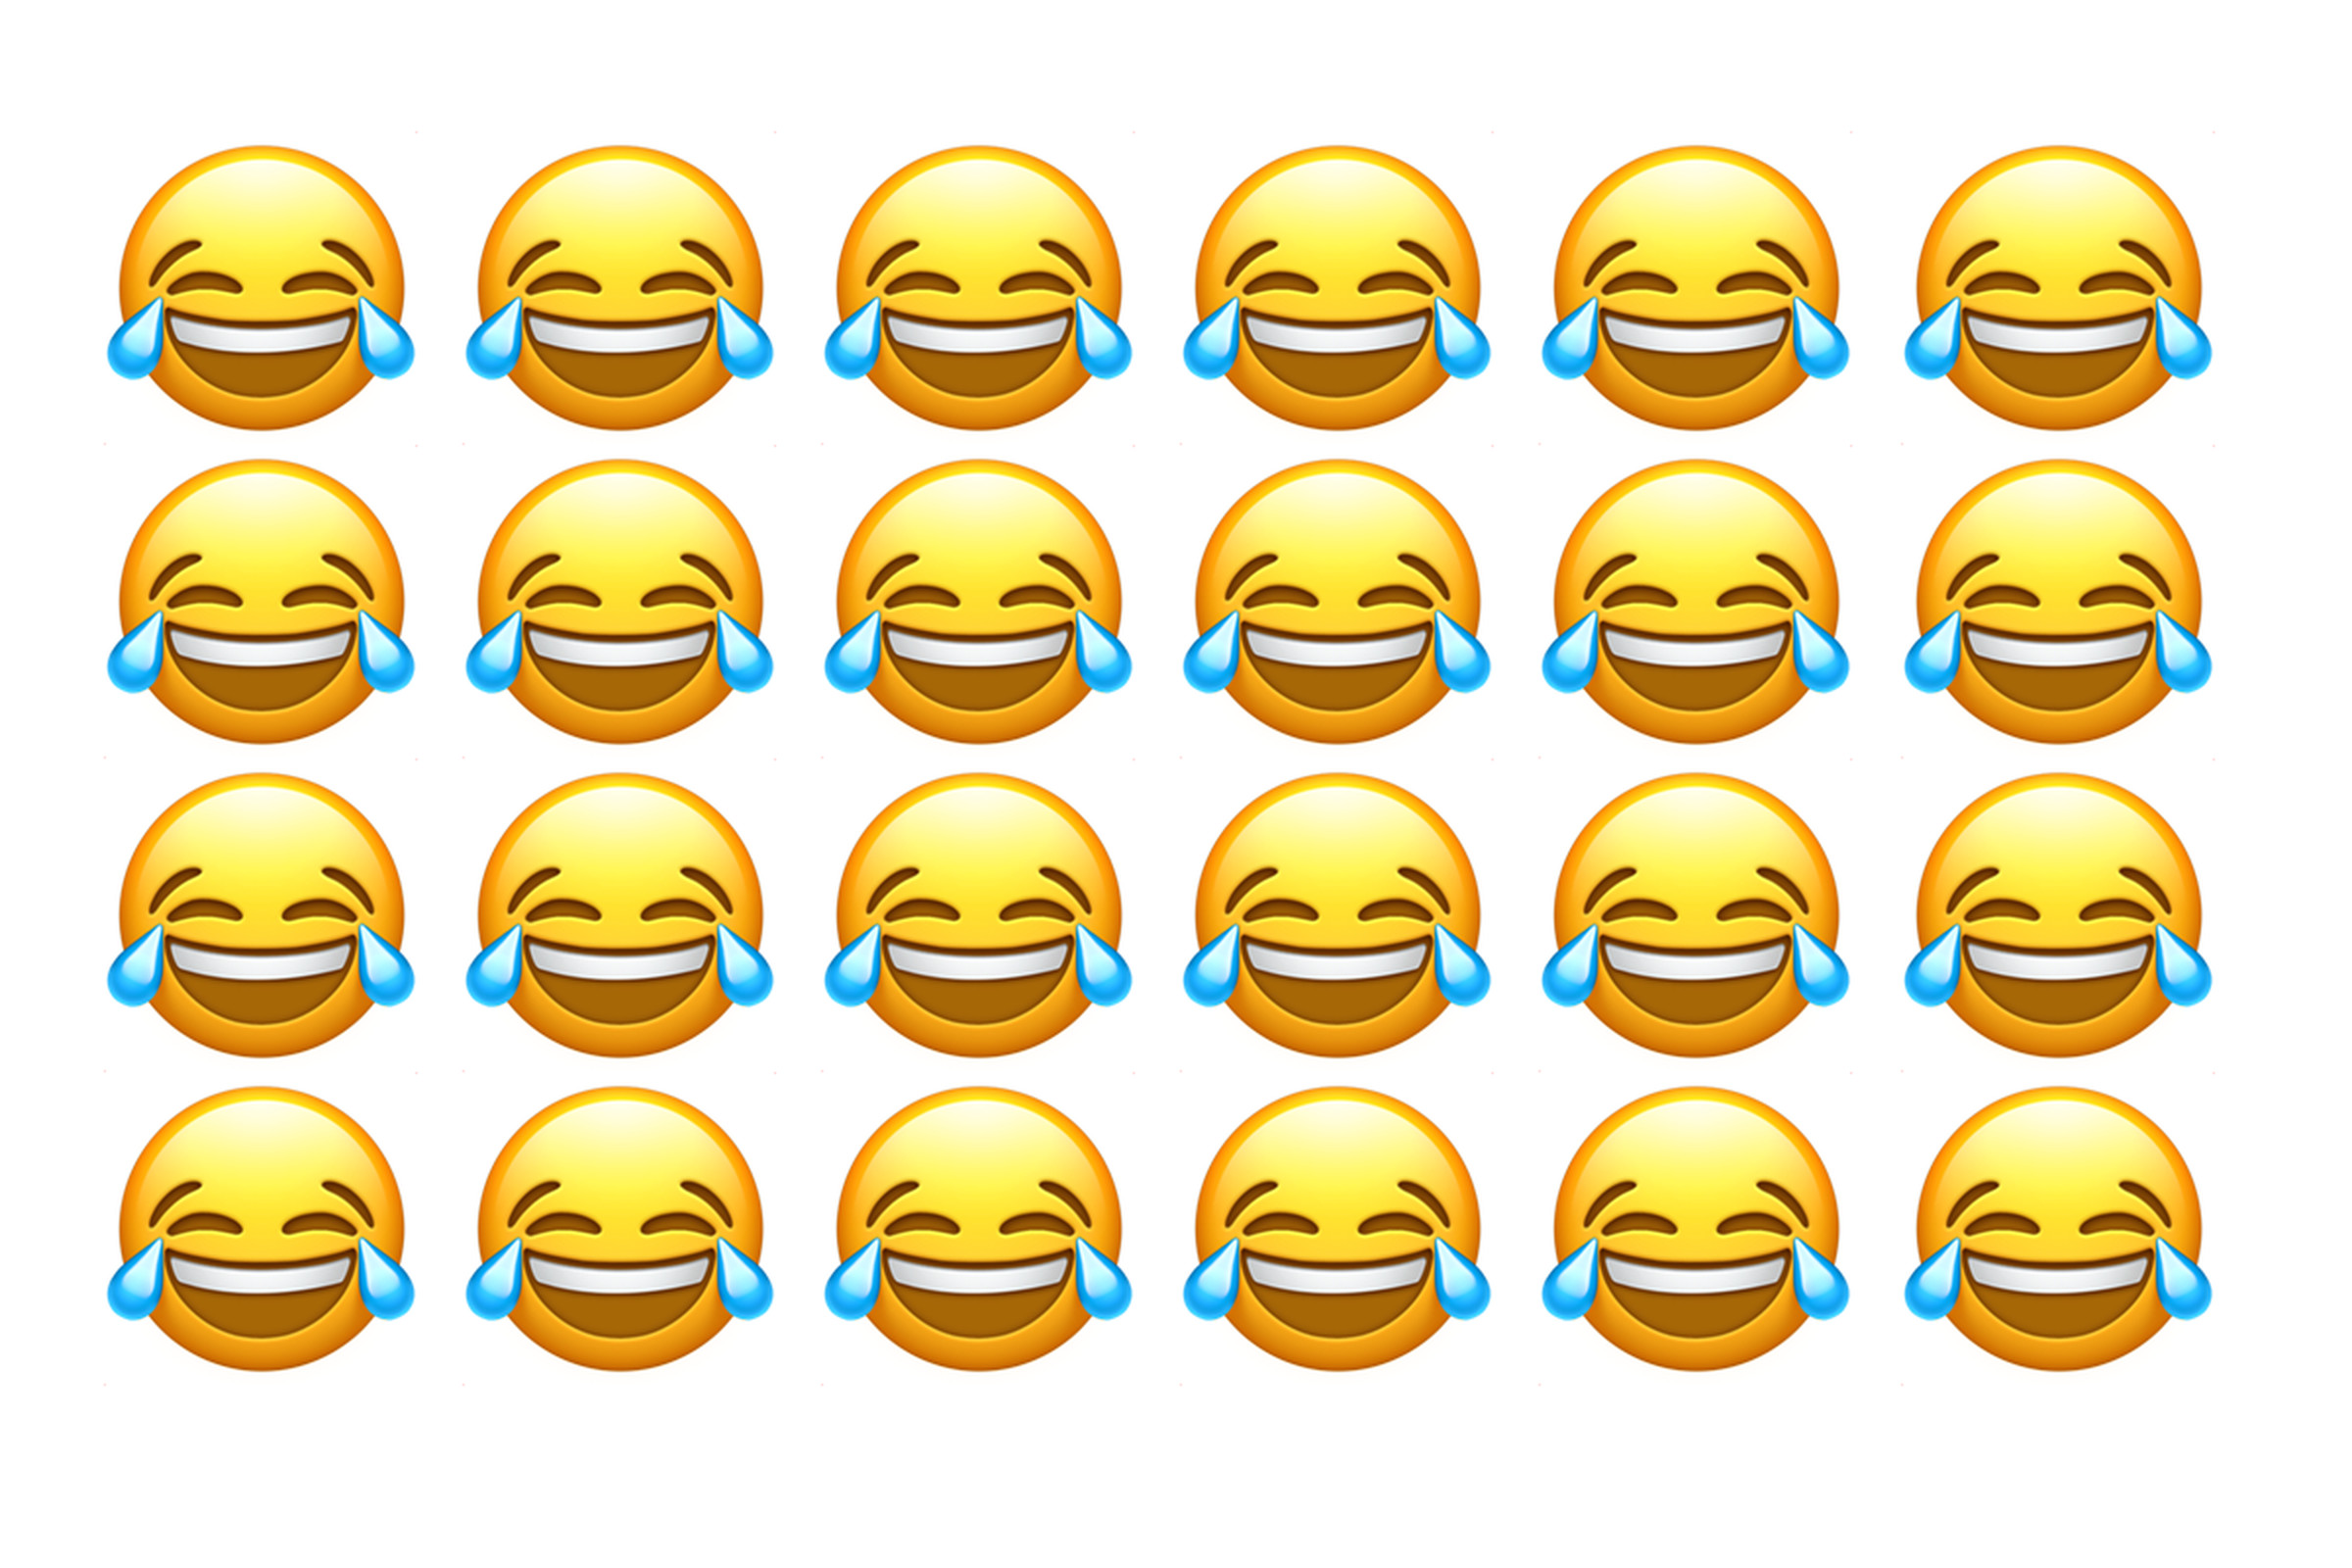 24 face with tears of joy emoji, each more terrifying than the last.